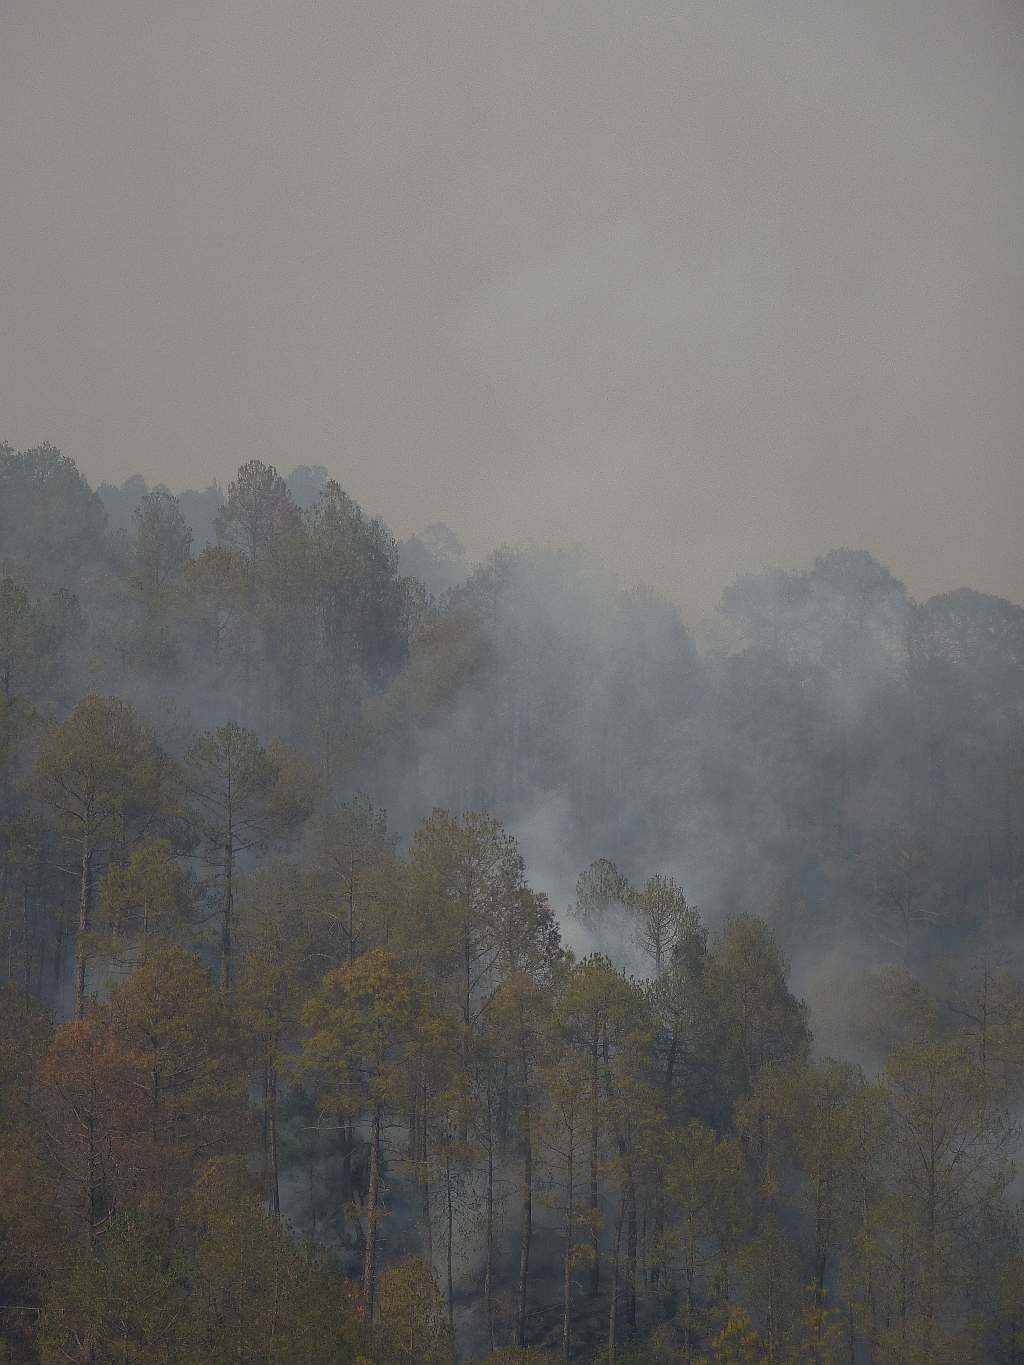 The pine forest continues to smoke after a night of heavy rain